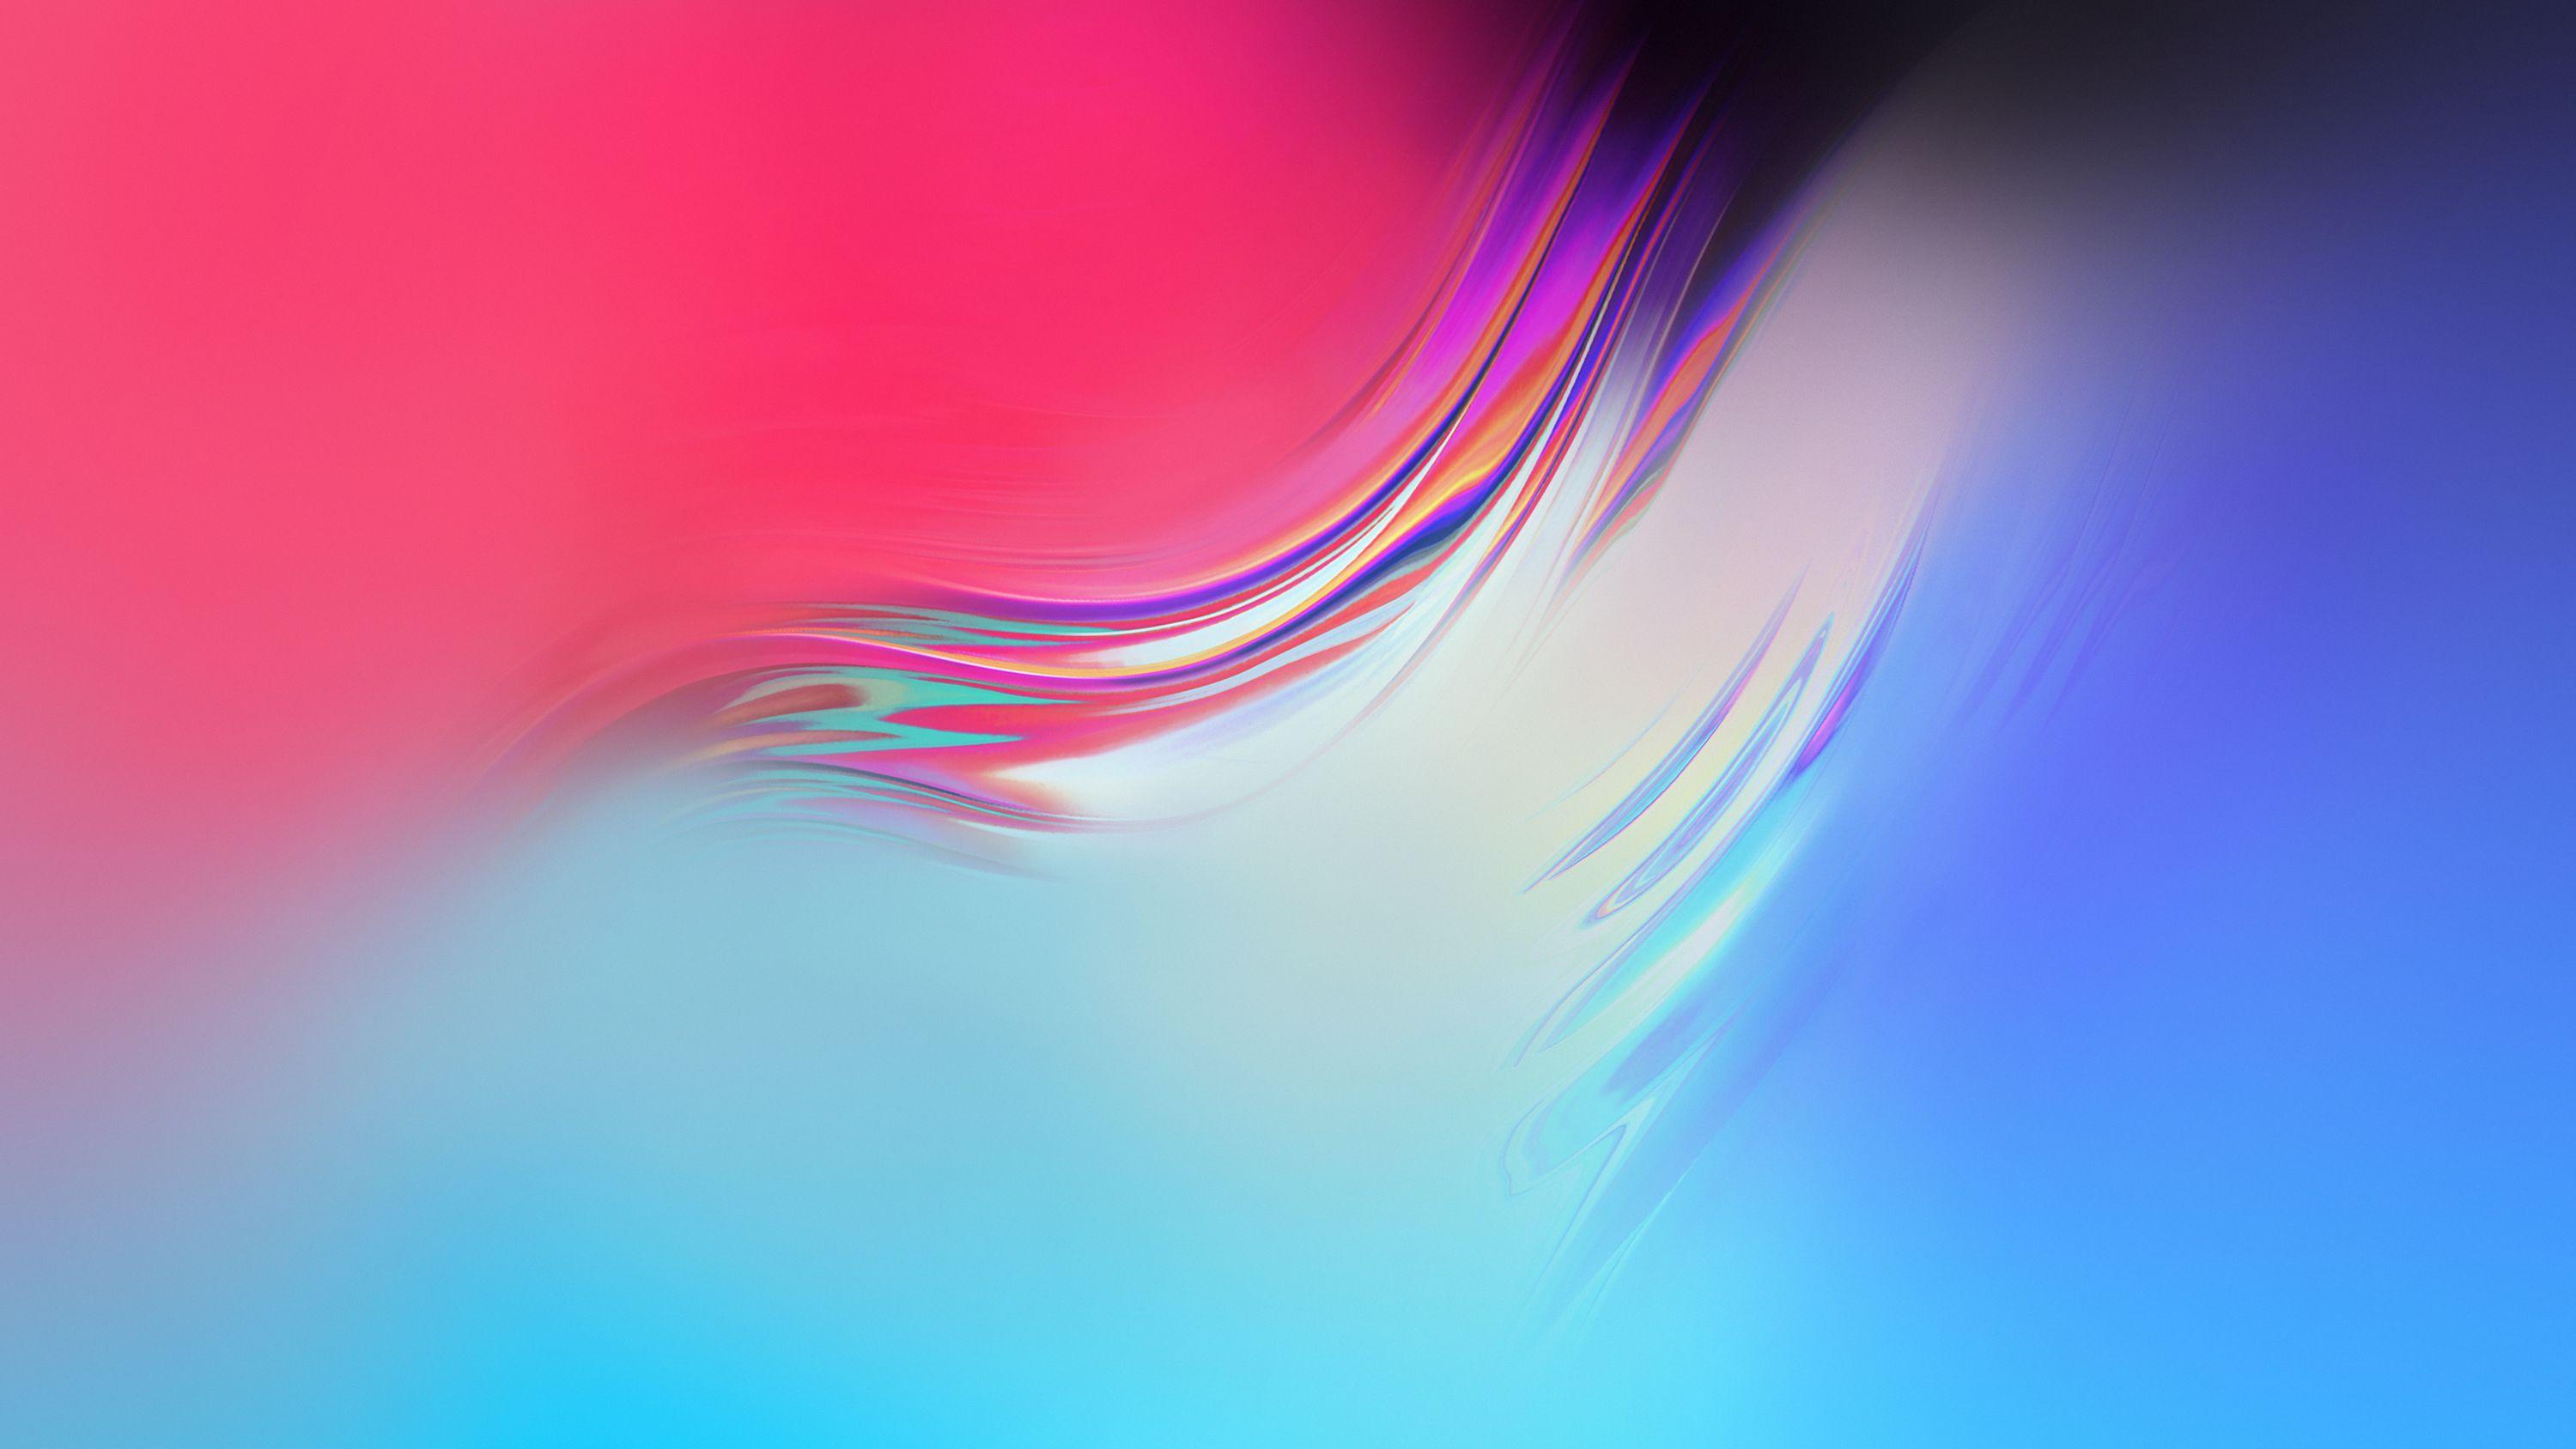 Download Samsung Galaxy S10 Plus Live Wallpapers for All Android